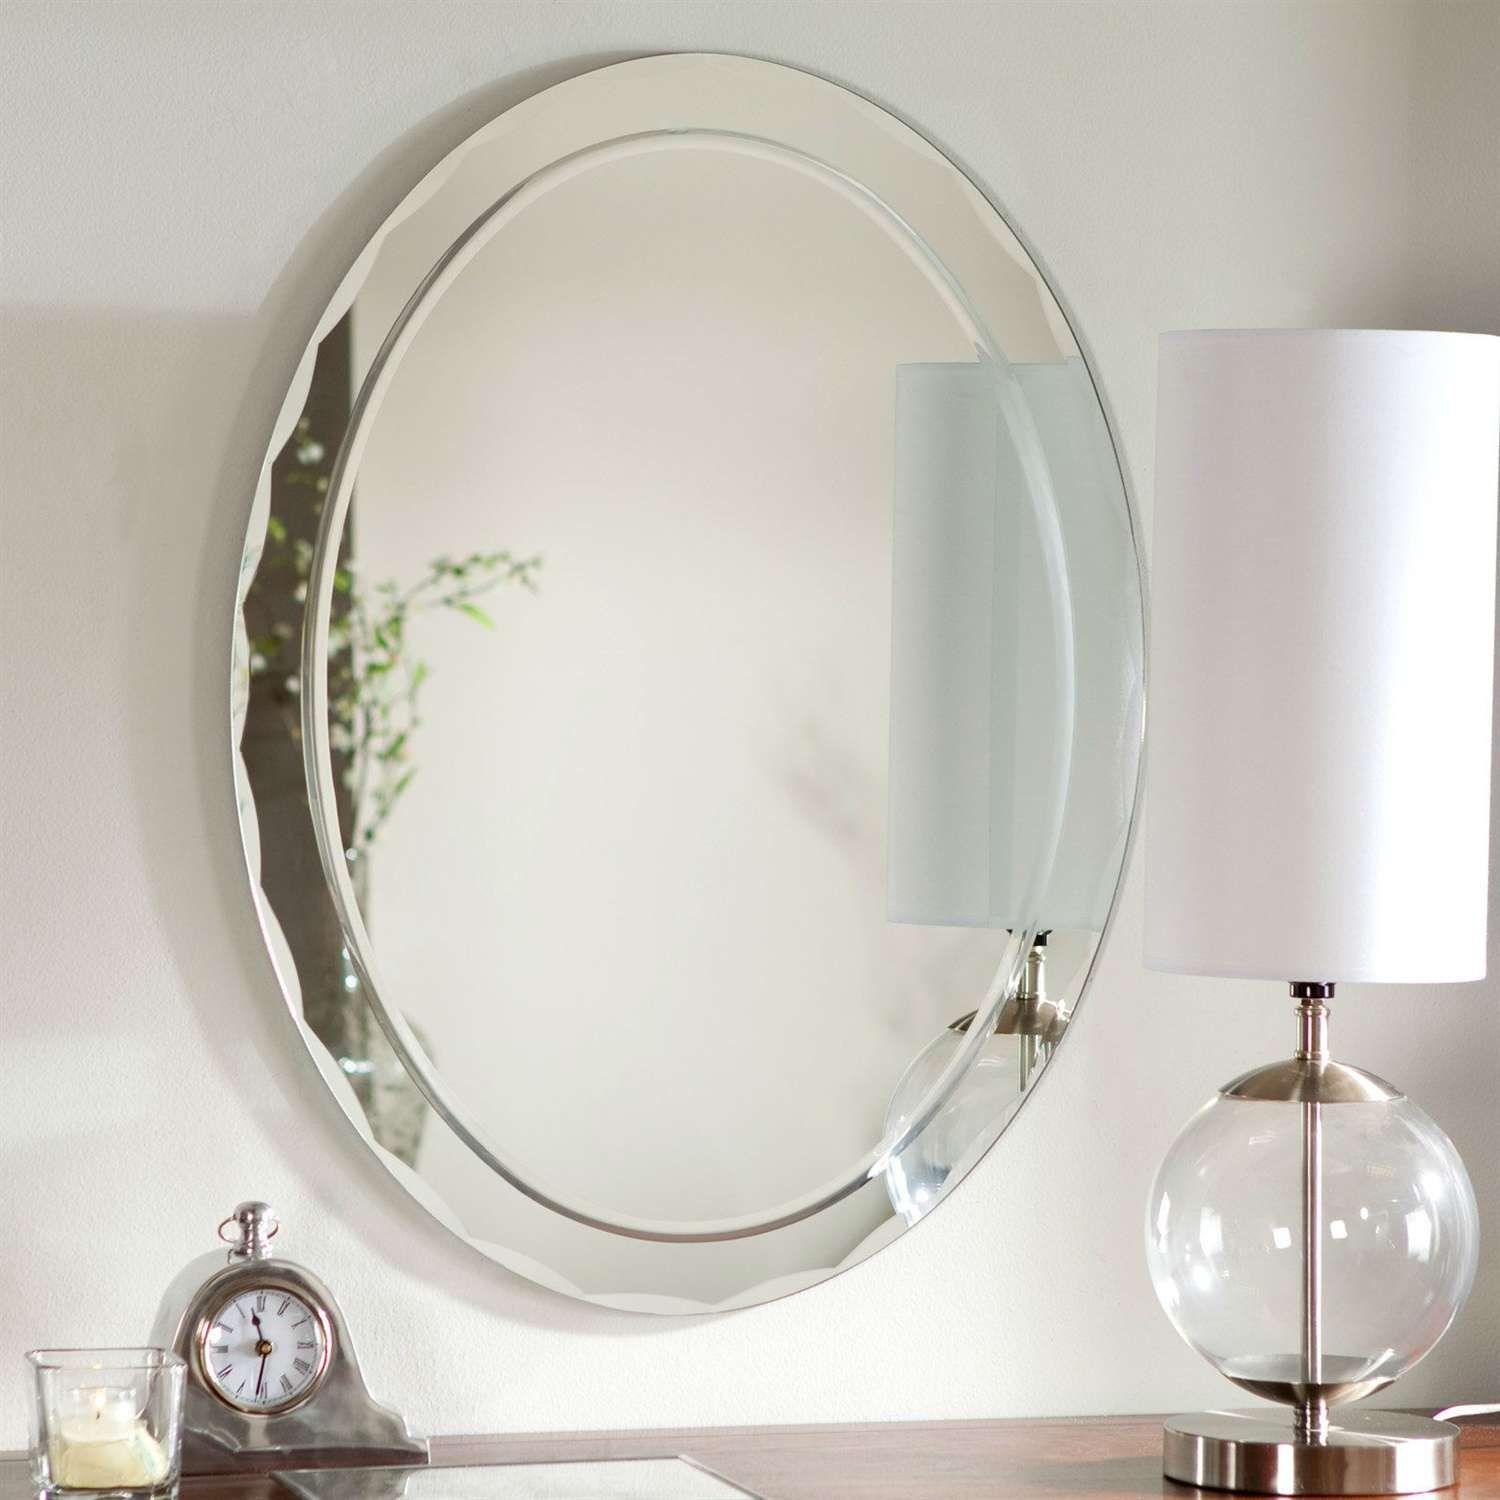 Oval Frameless Bathroom Vanity Wall Mirror With Beveled Edge Scallop Regarding Oval Frameless Led Wall Mirrors (View 2 of 15)